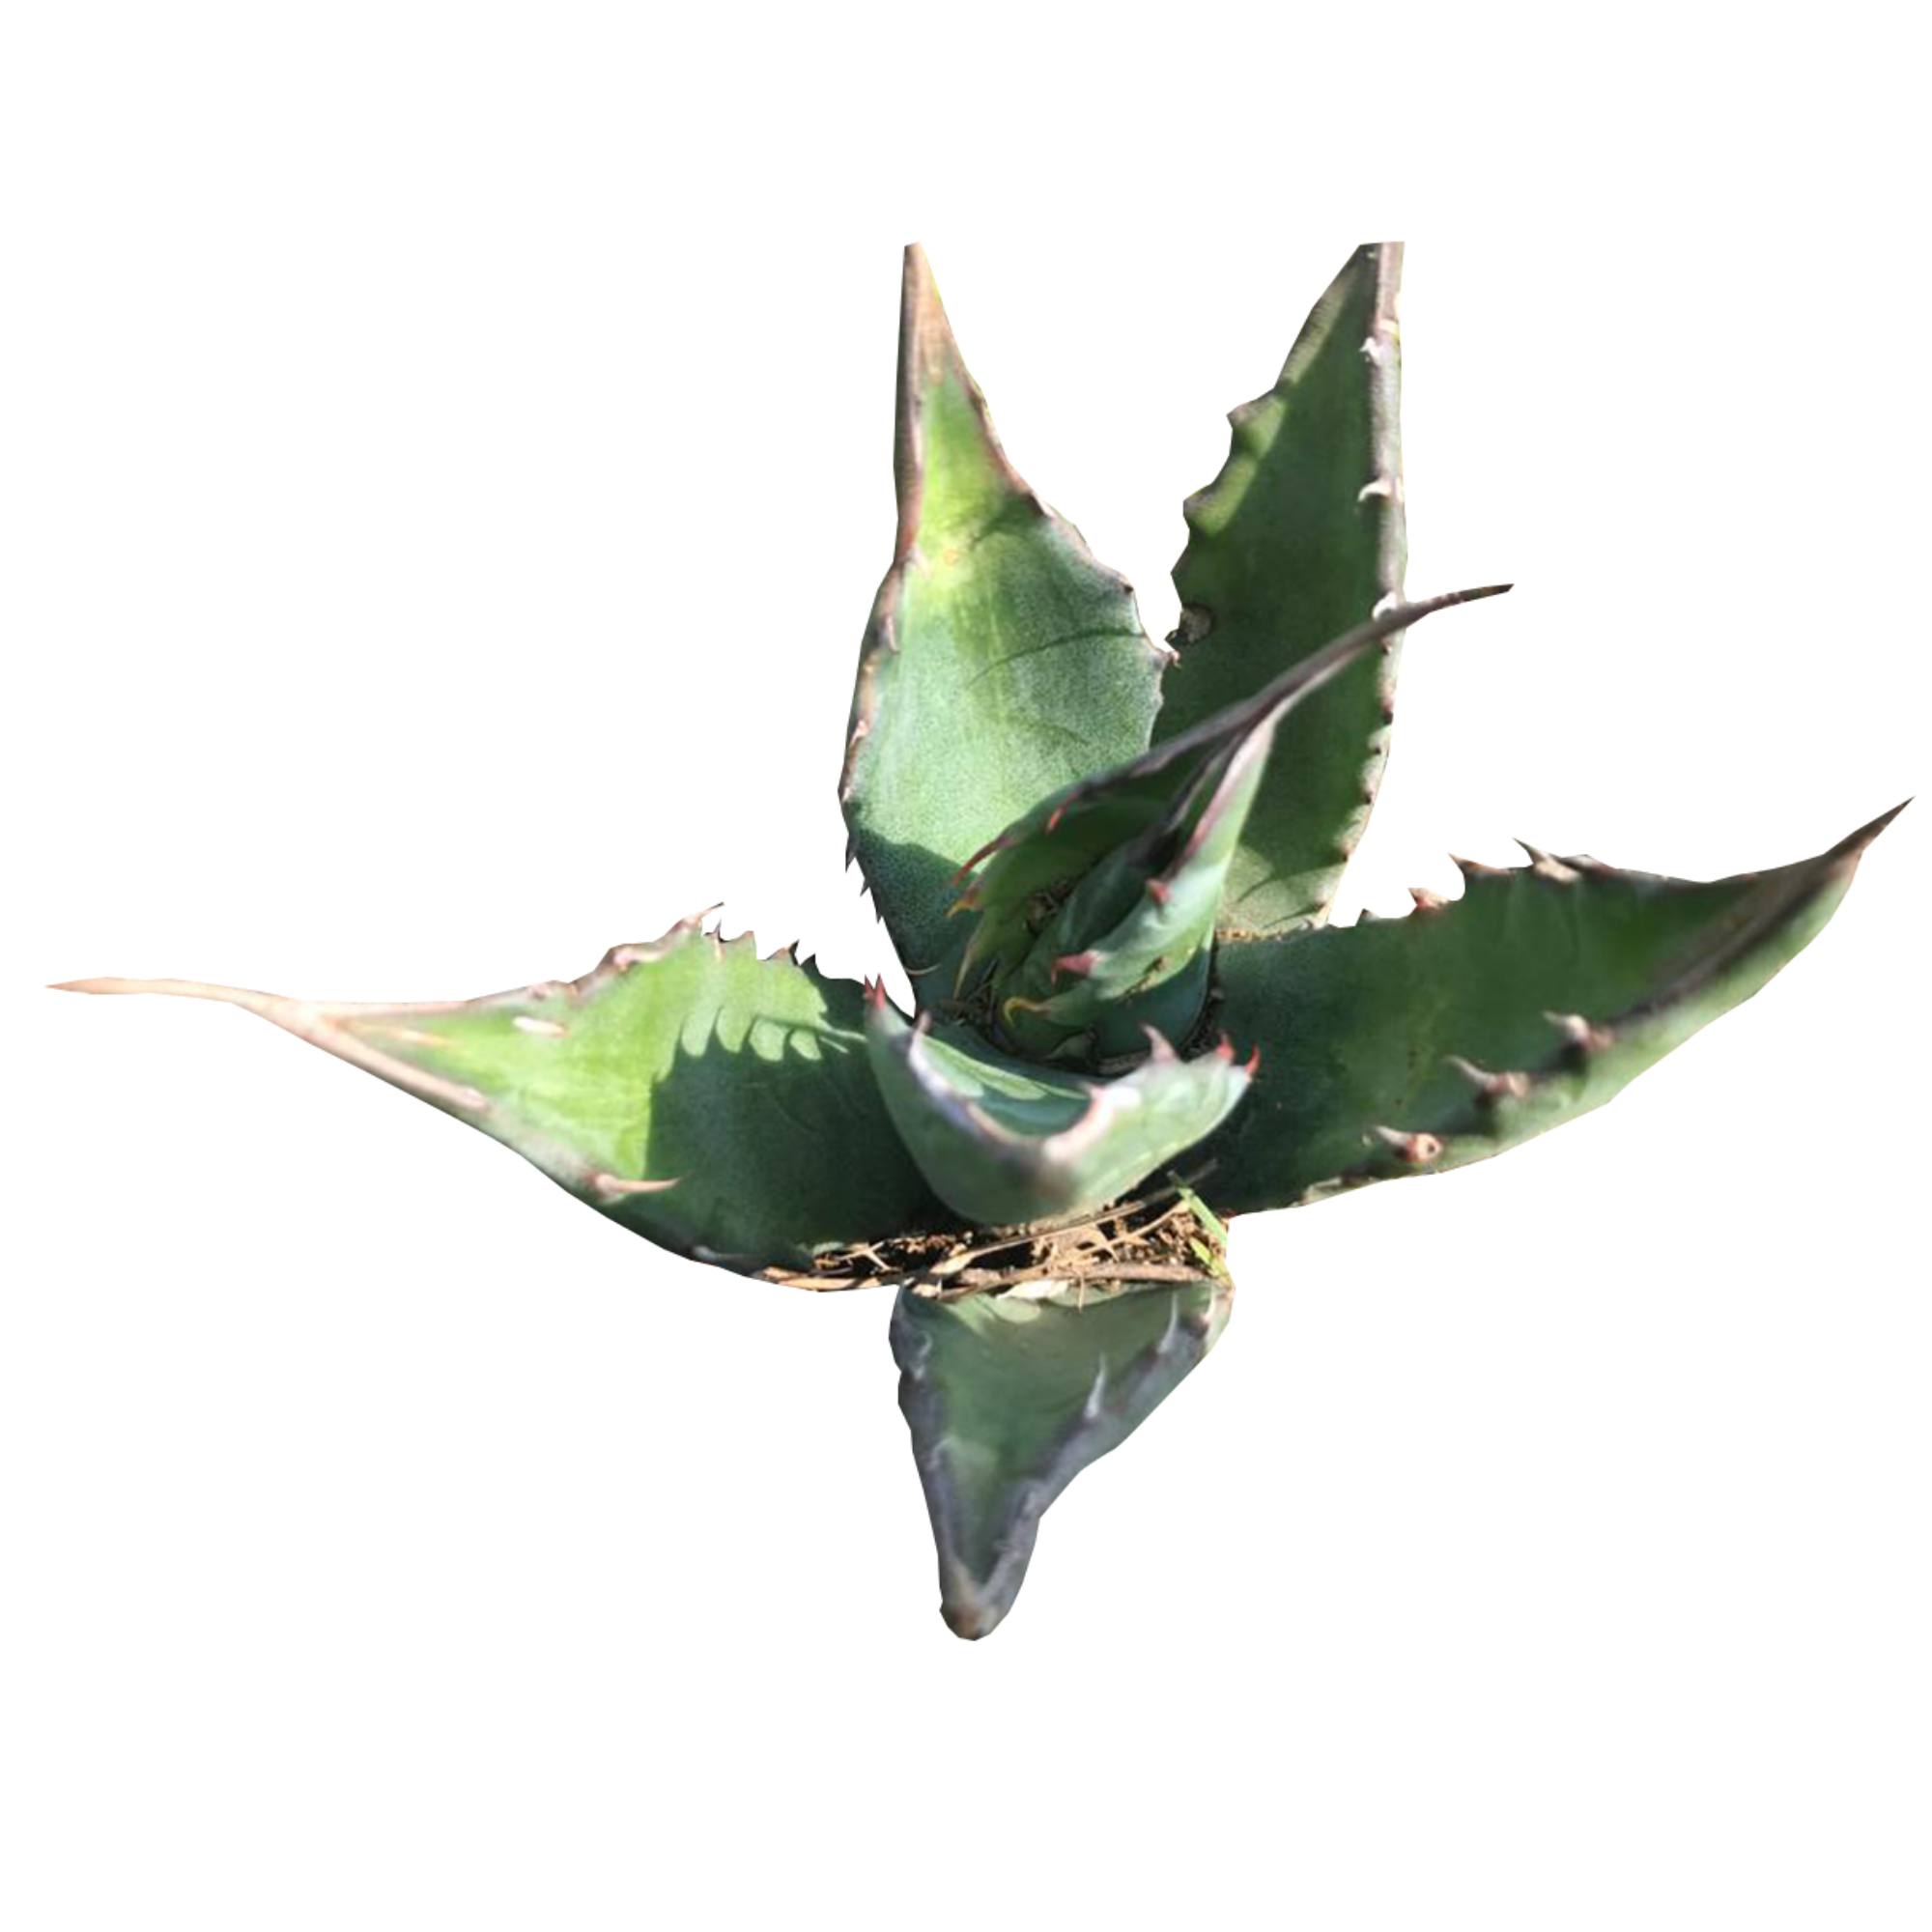 AGAVE SALMIANA PLANT (Package of 250 plants).